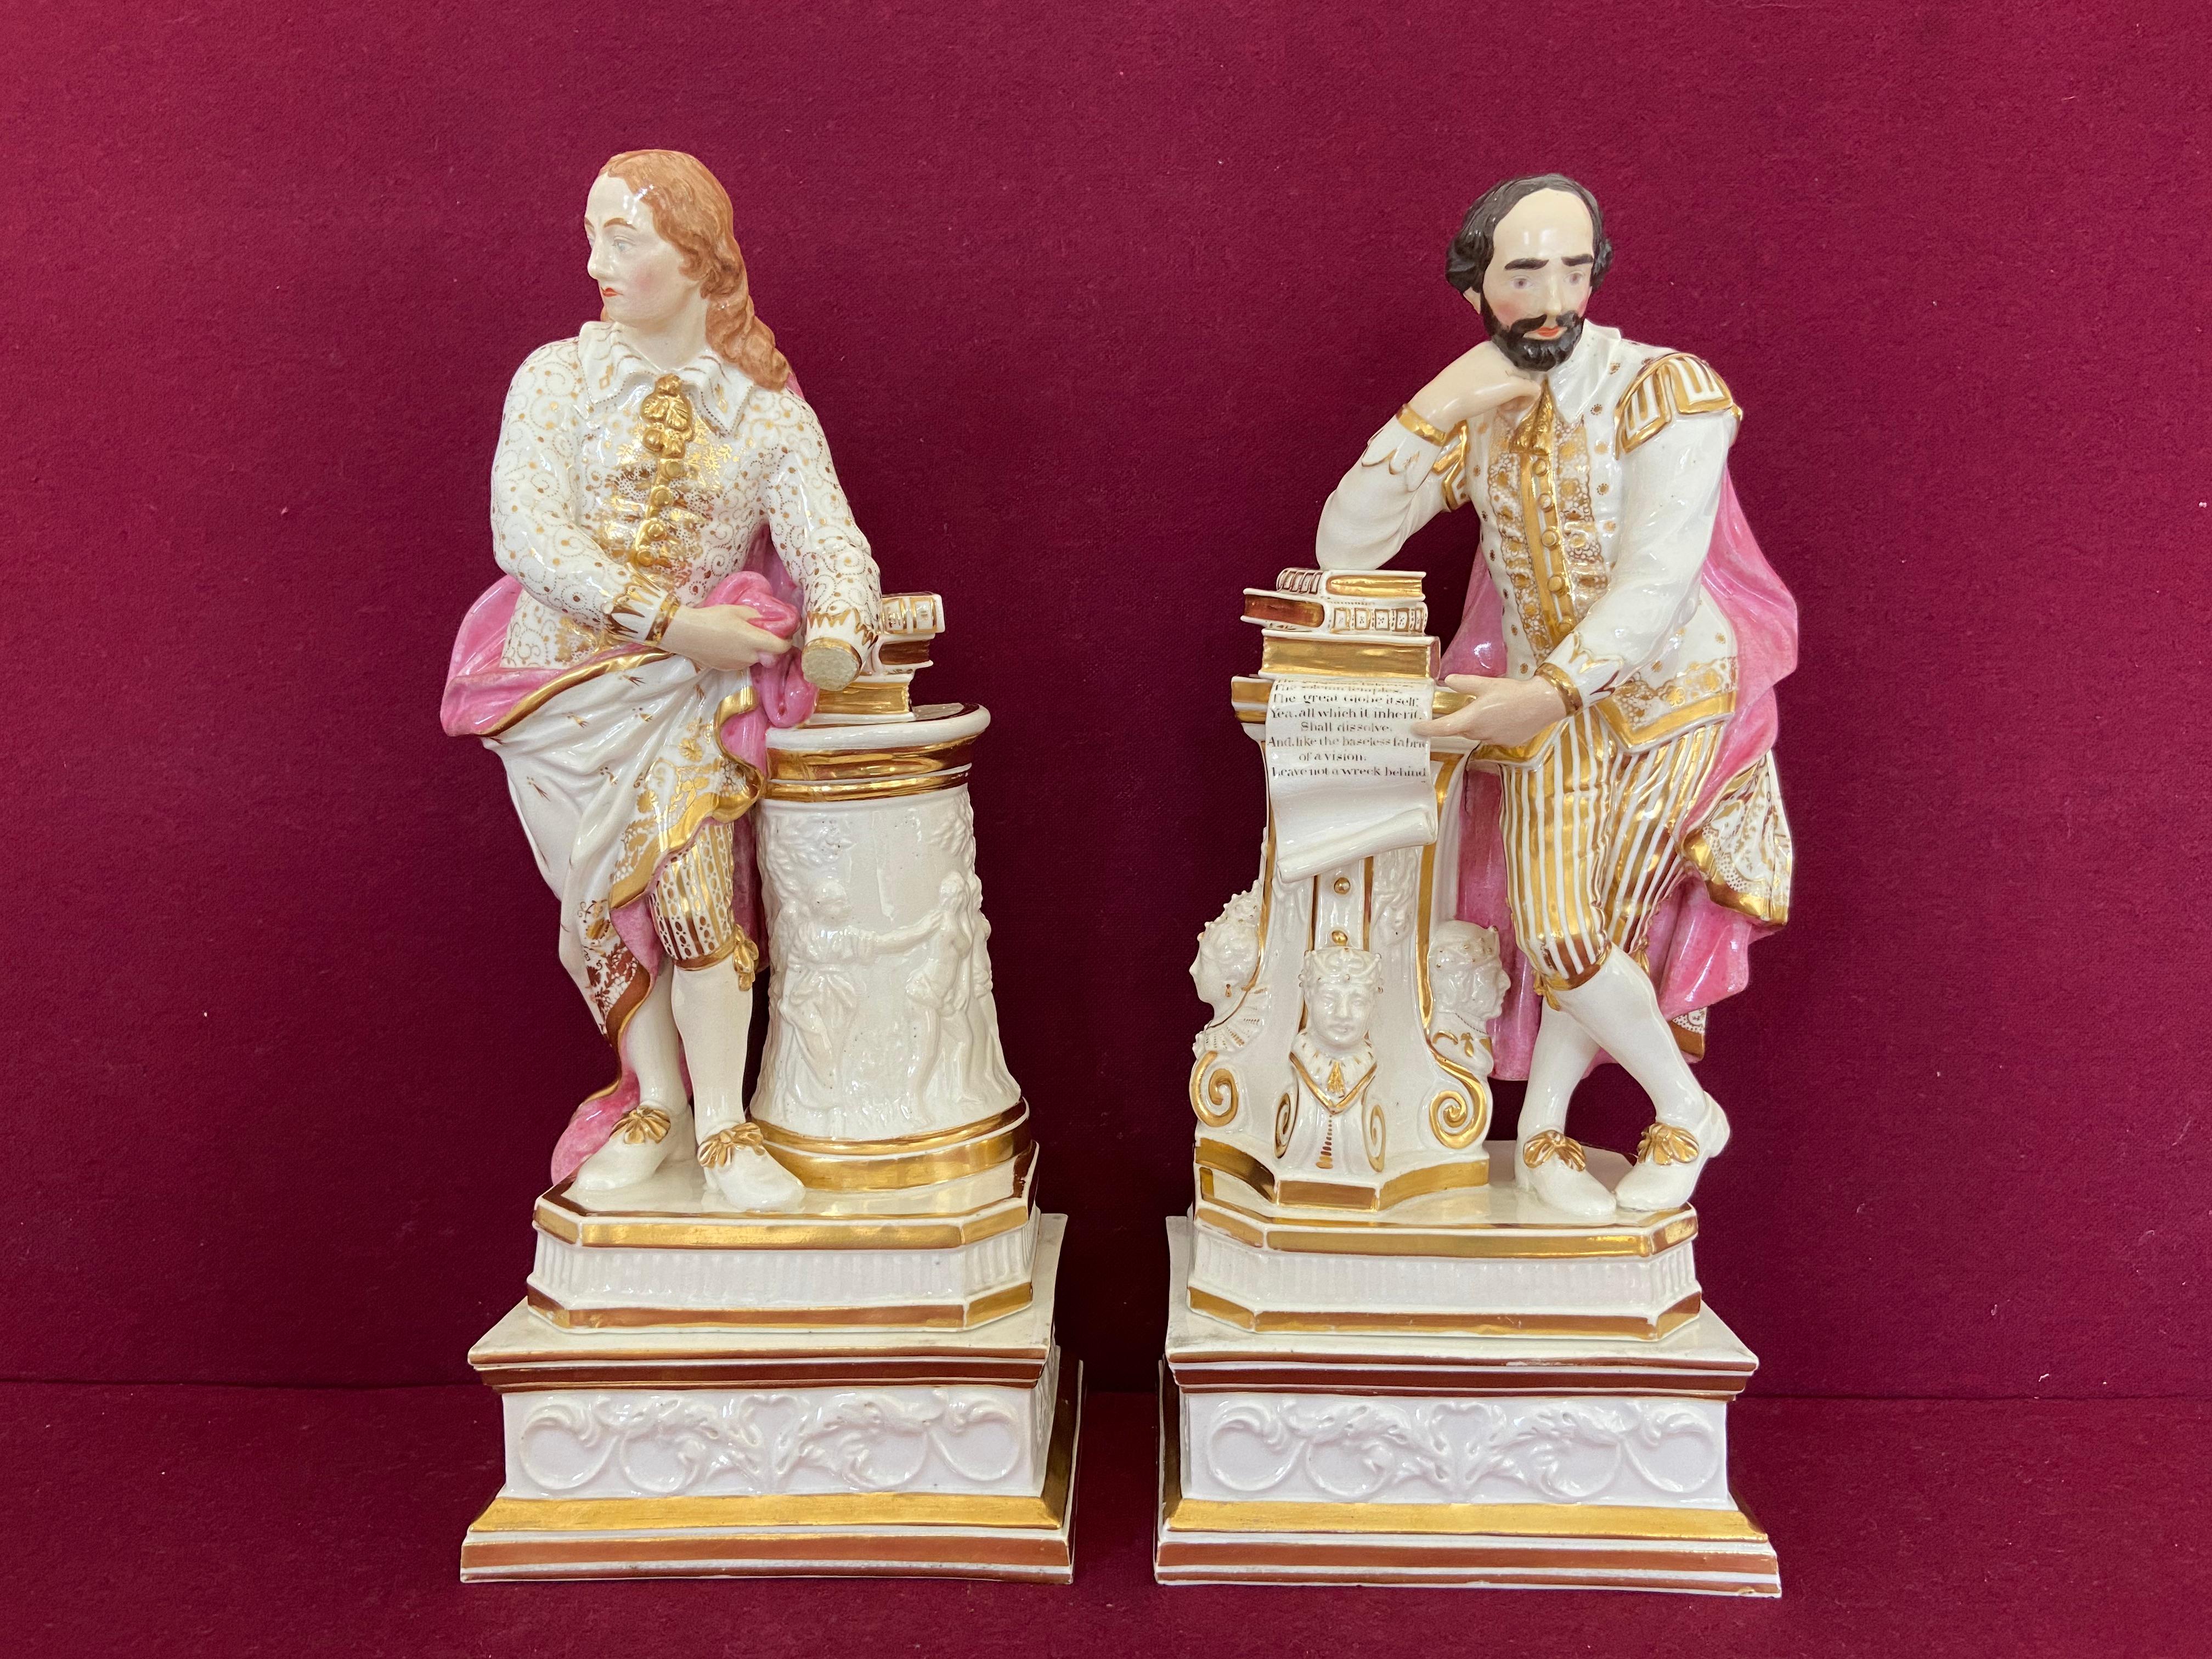 A very fine pair of 19th century Bloor Derby figures of John Milton & William Shakespeare c.1830

This pair have their separate original plinths which appear to have previously been unrecorded.
Both figures have Meissen style ‘crossed swords’ and